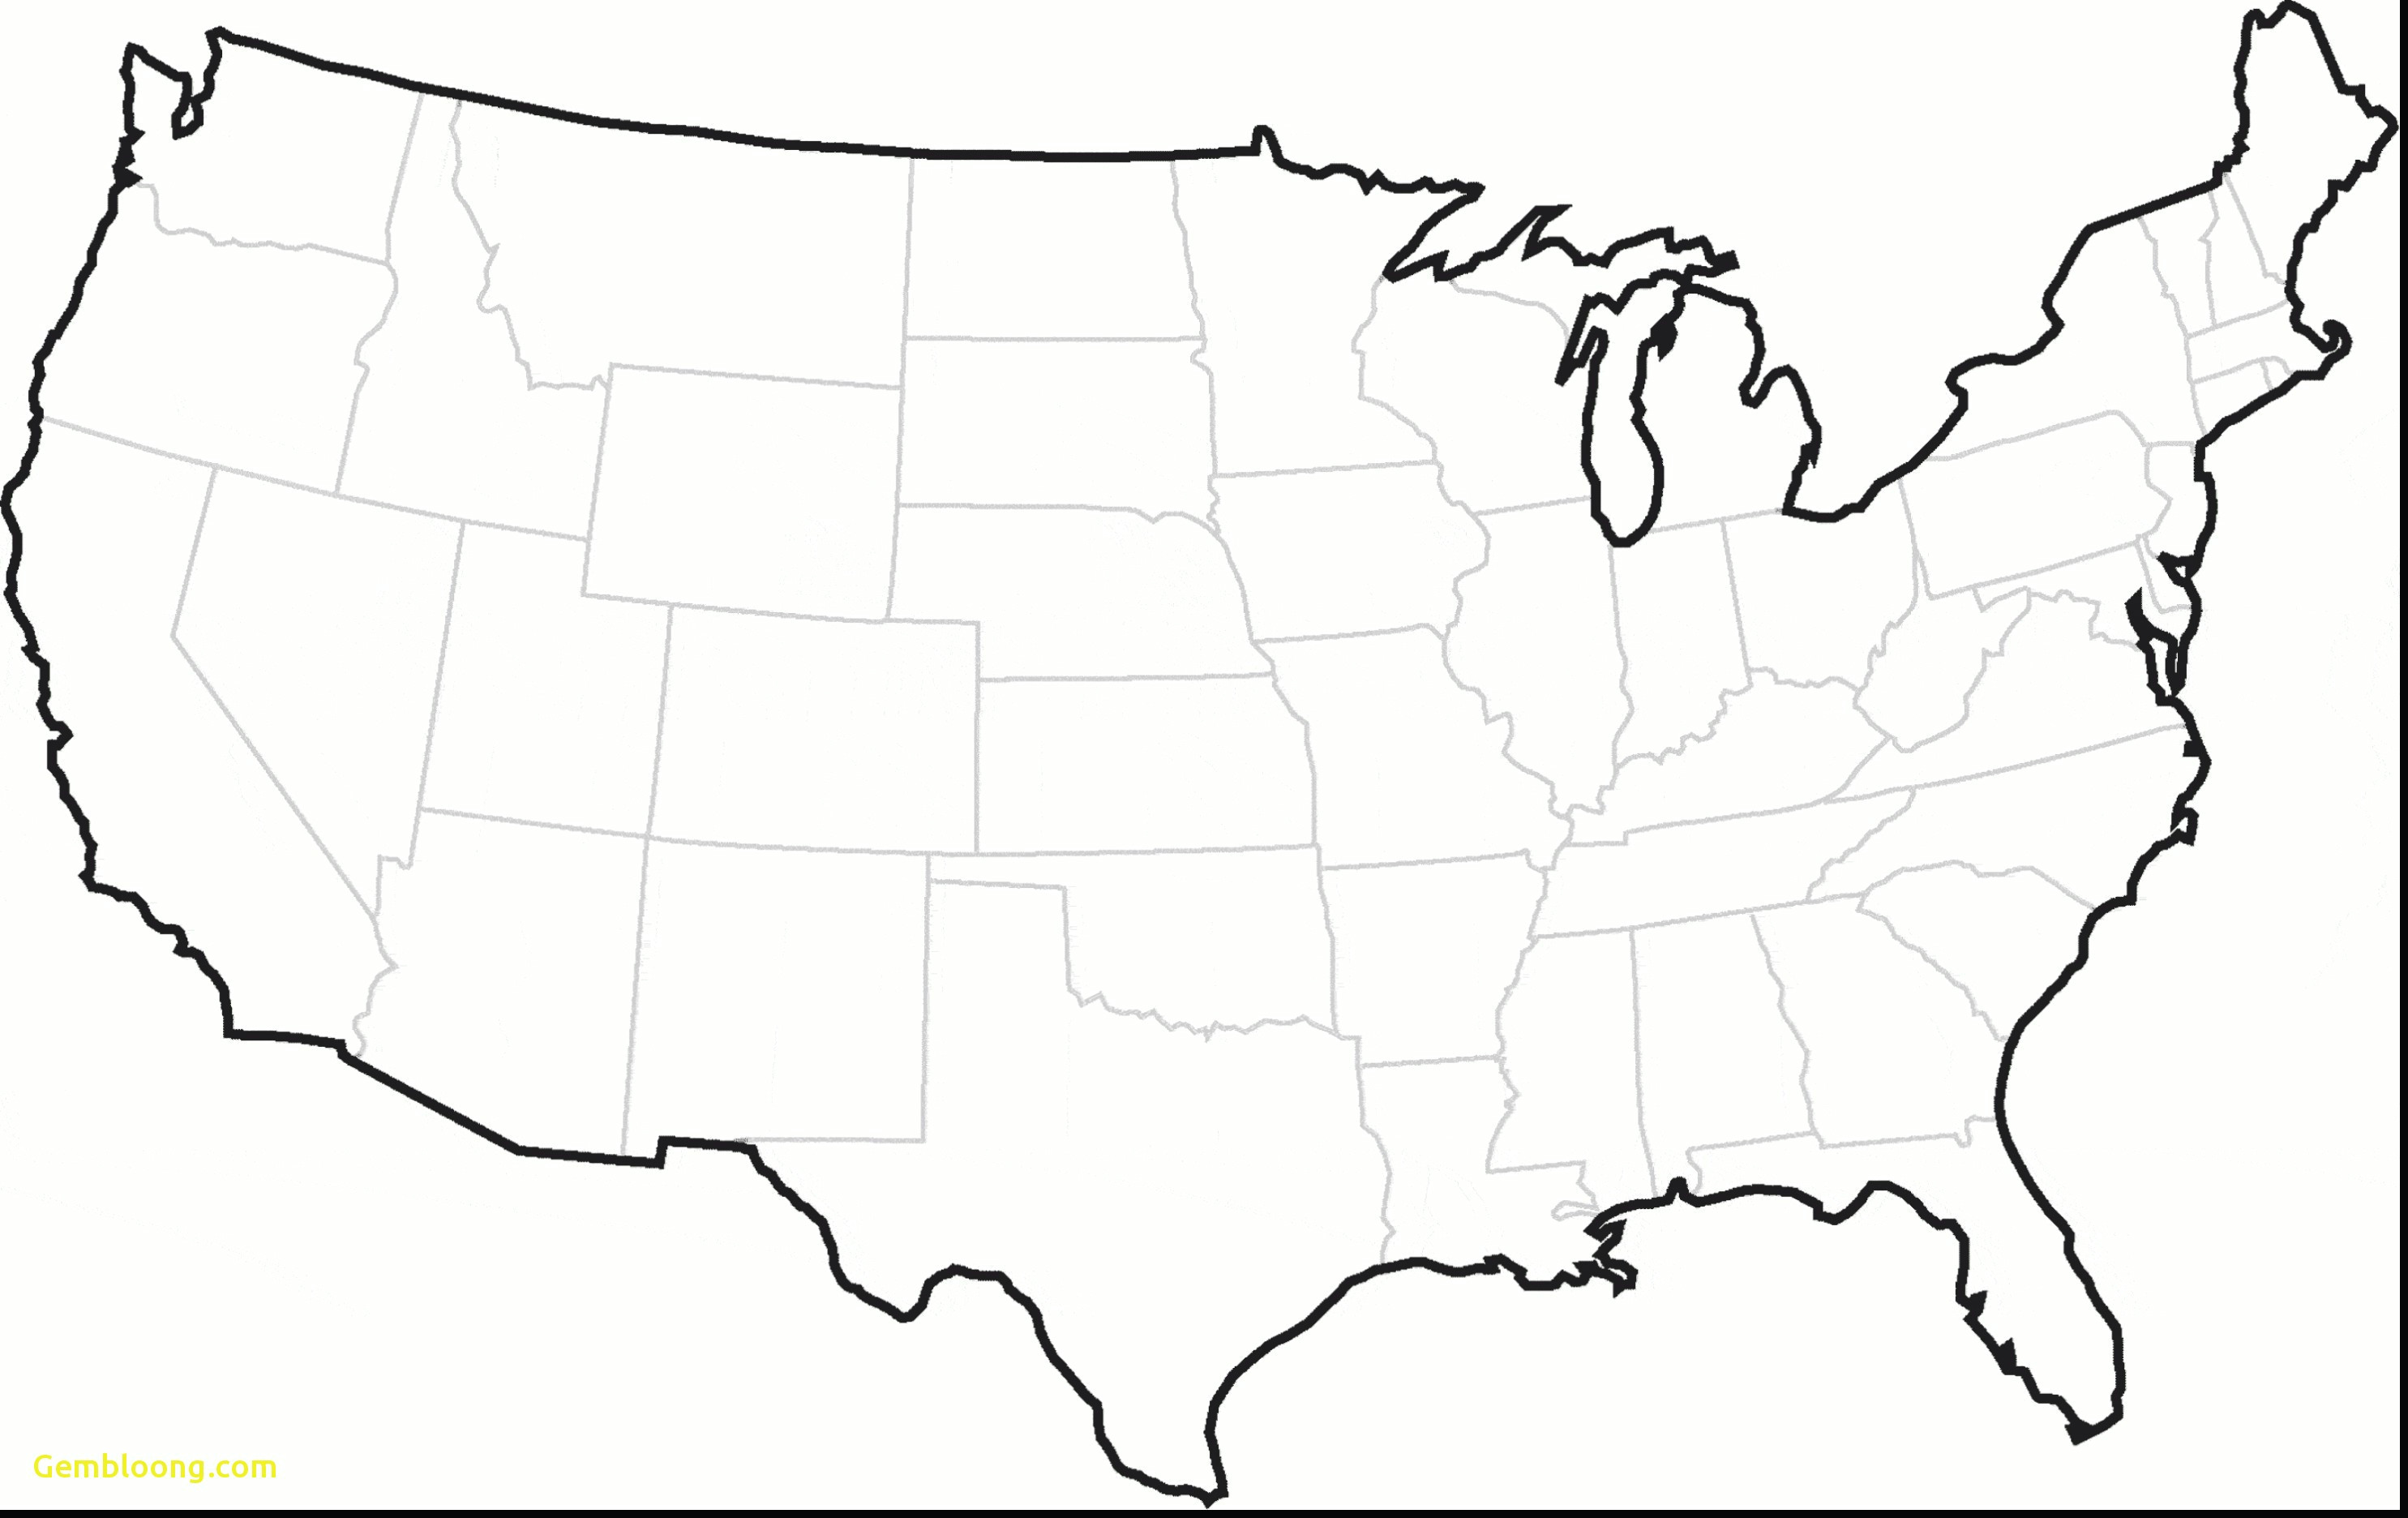 I M Drawing A Blank northeast Usa Outline Map Valid Free Printable Us Map with Cities